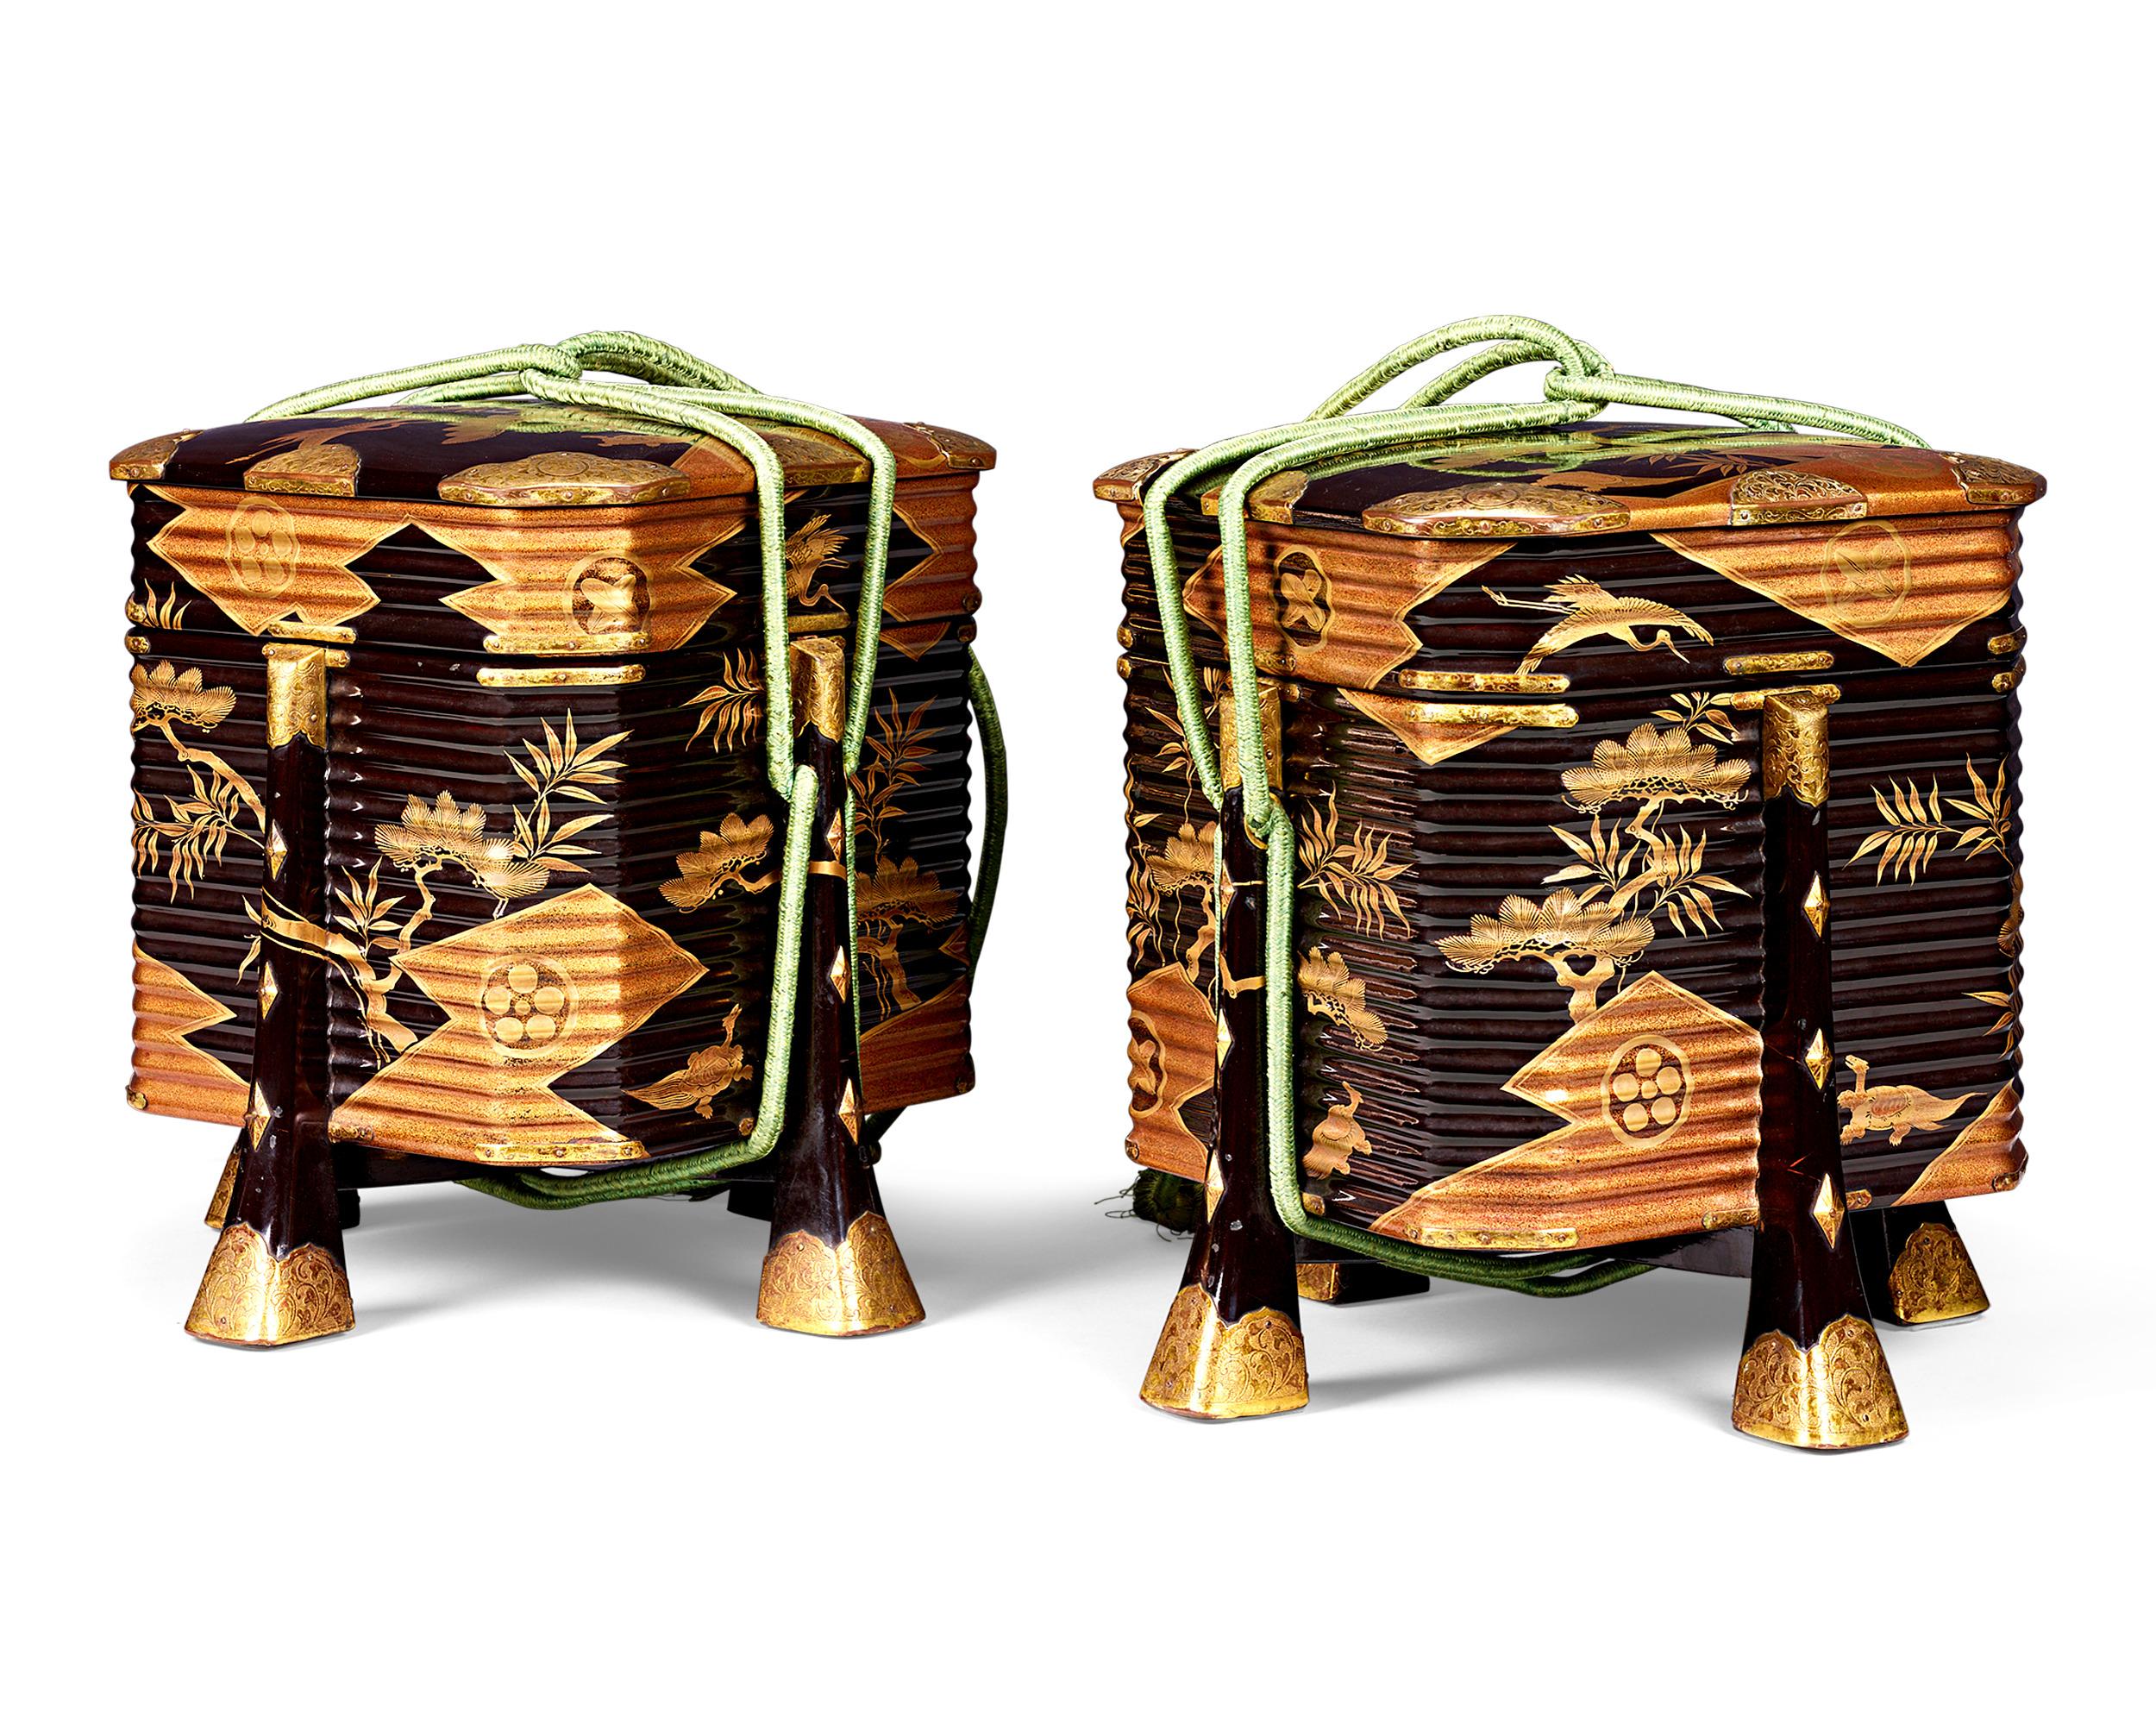 This remarkable pair of Edo-period lacquered Hokkai, or picnic baskets, was likely crafted for a prominent daimyo (lord) around 1780 during this time of great affluence. Reflecting a golden age of Japanese artistry, these elaborate vessels were made